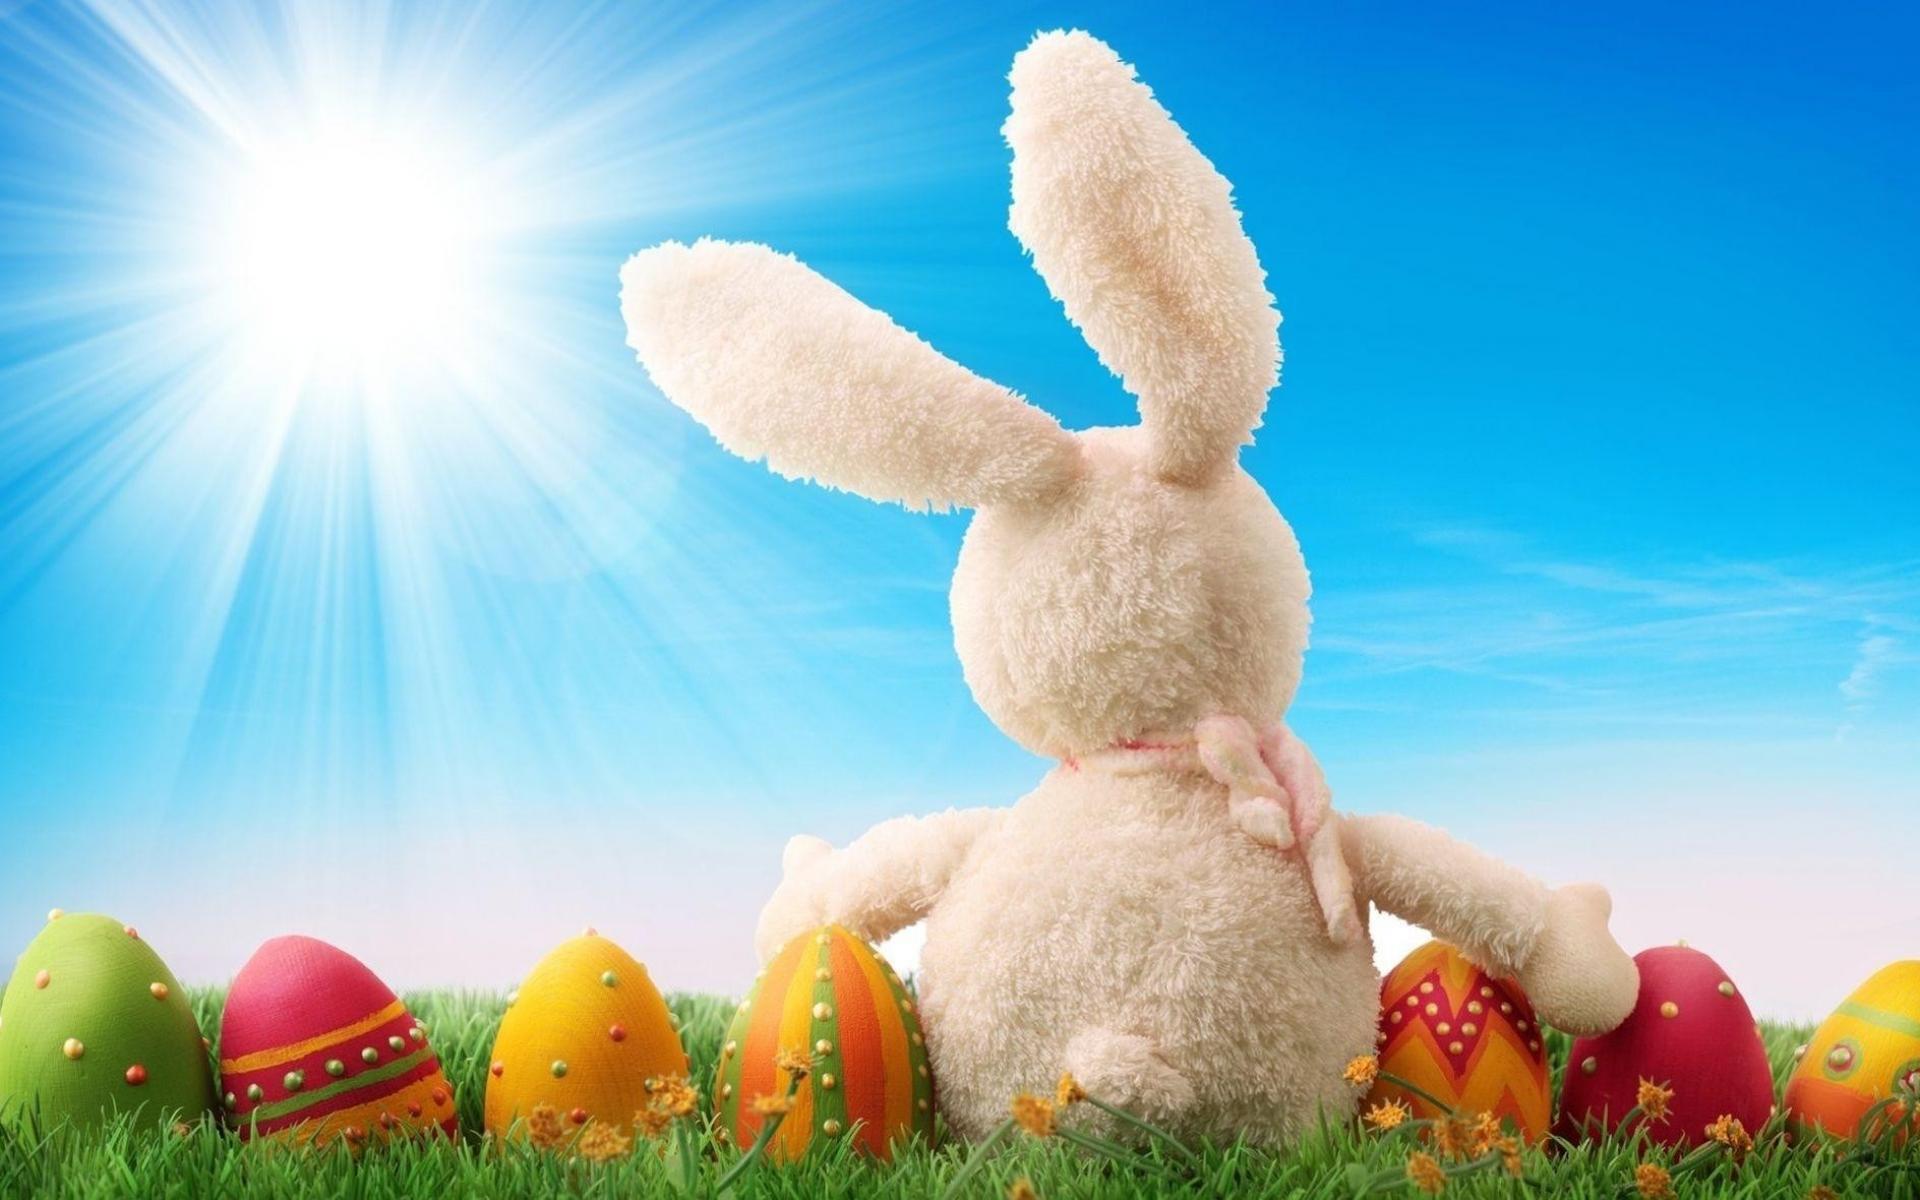 Under The Easter Wallpaper Category Of HD